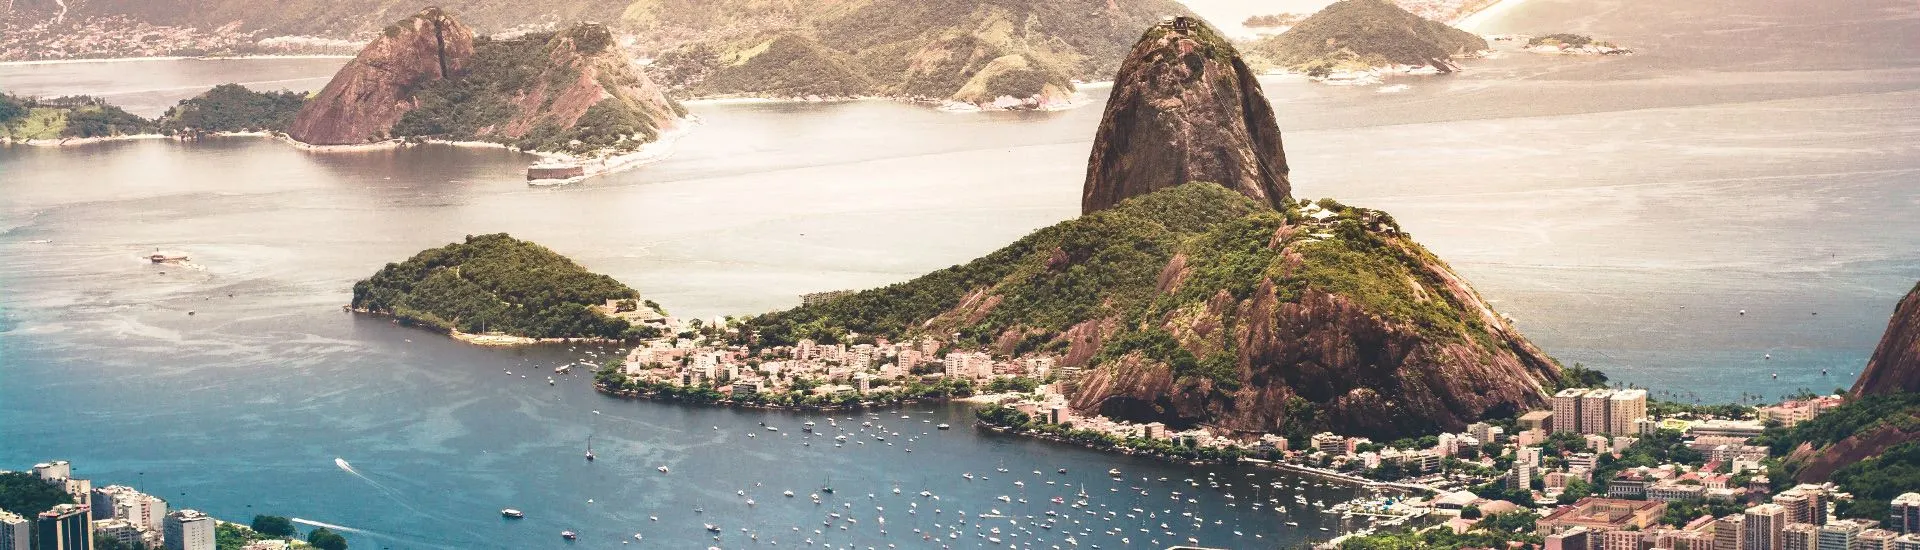 Panoramic view of Sugarloaf Mountain and Urca Hill in Rio de Janeiro